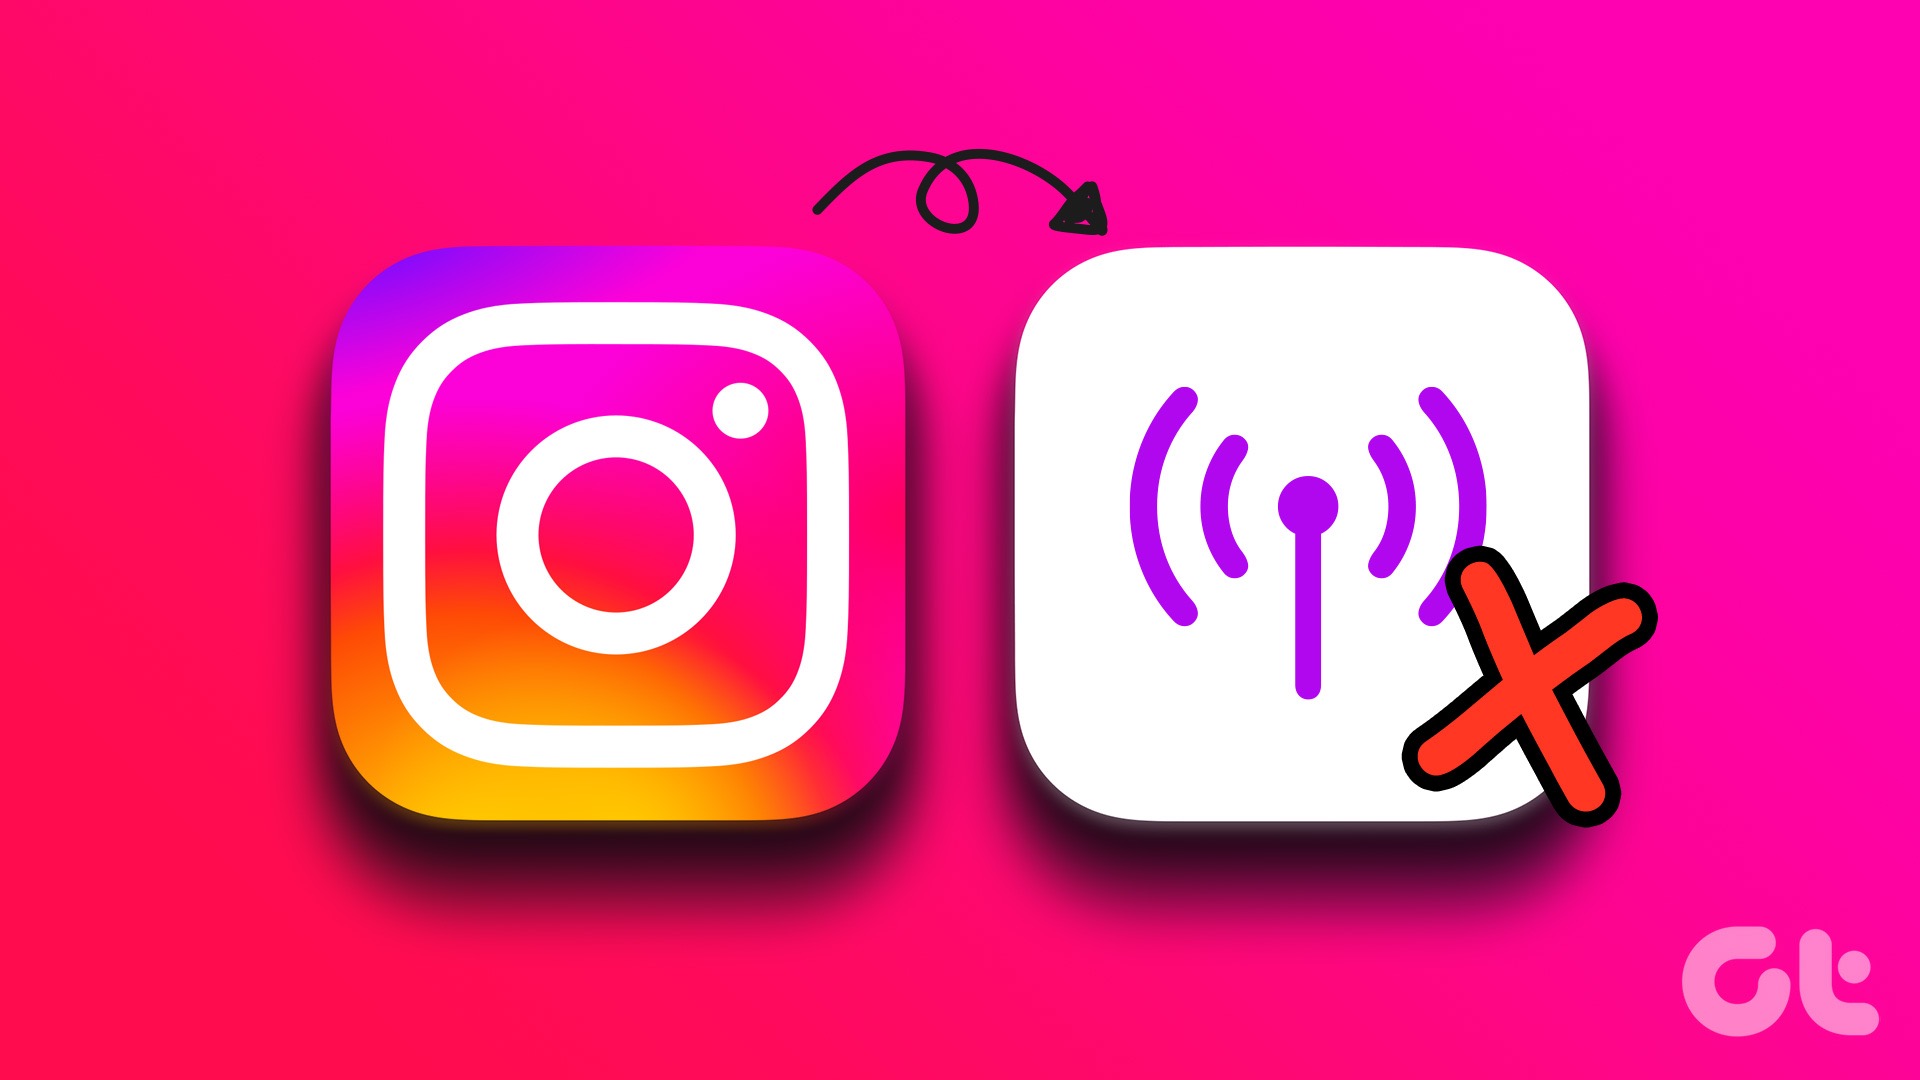 Instagram is facing multiple glitches worldwide, company looking